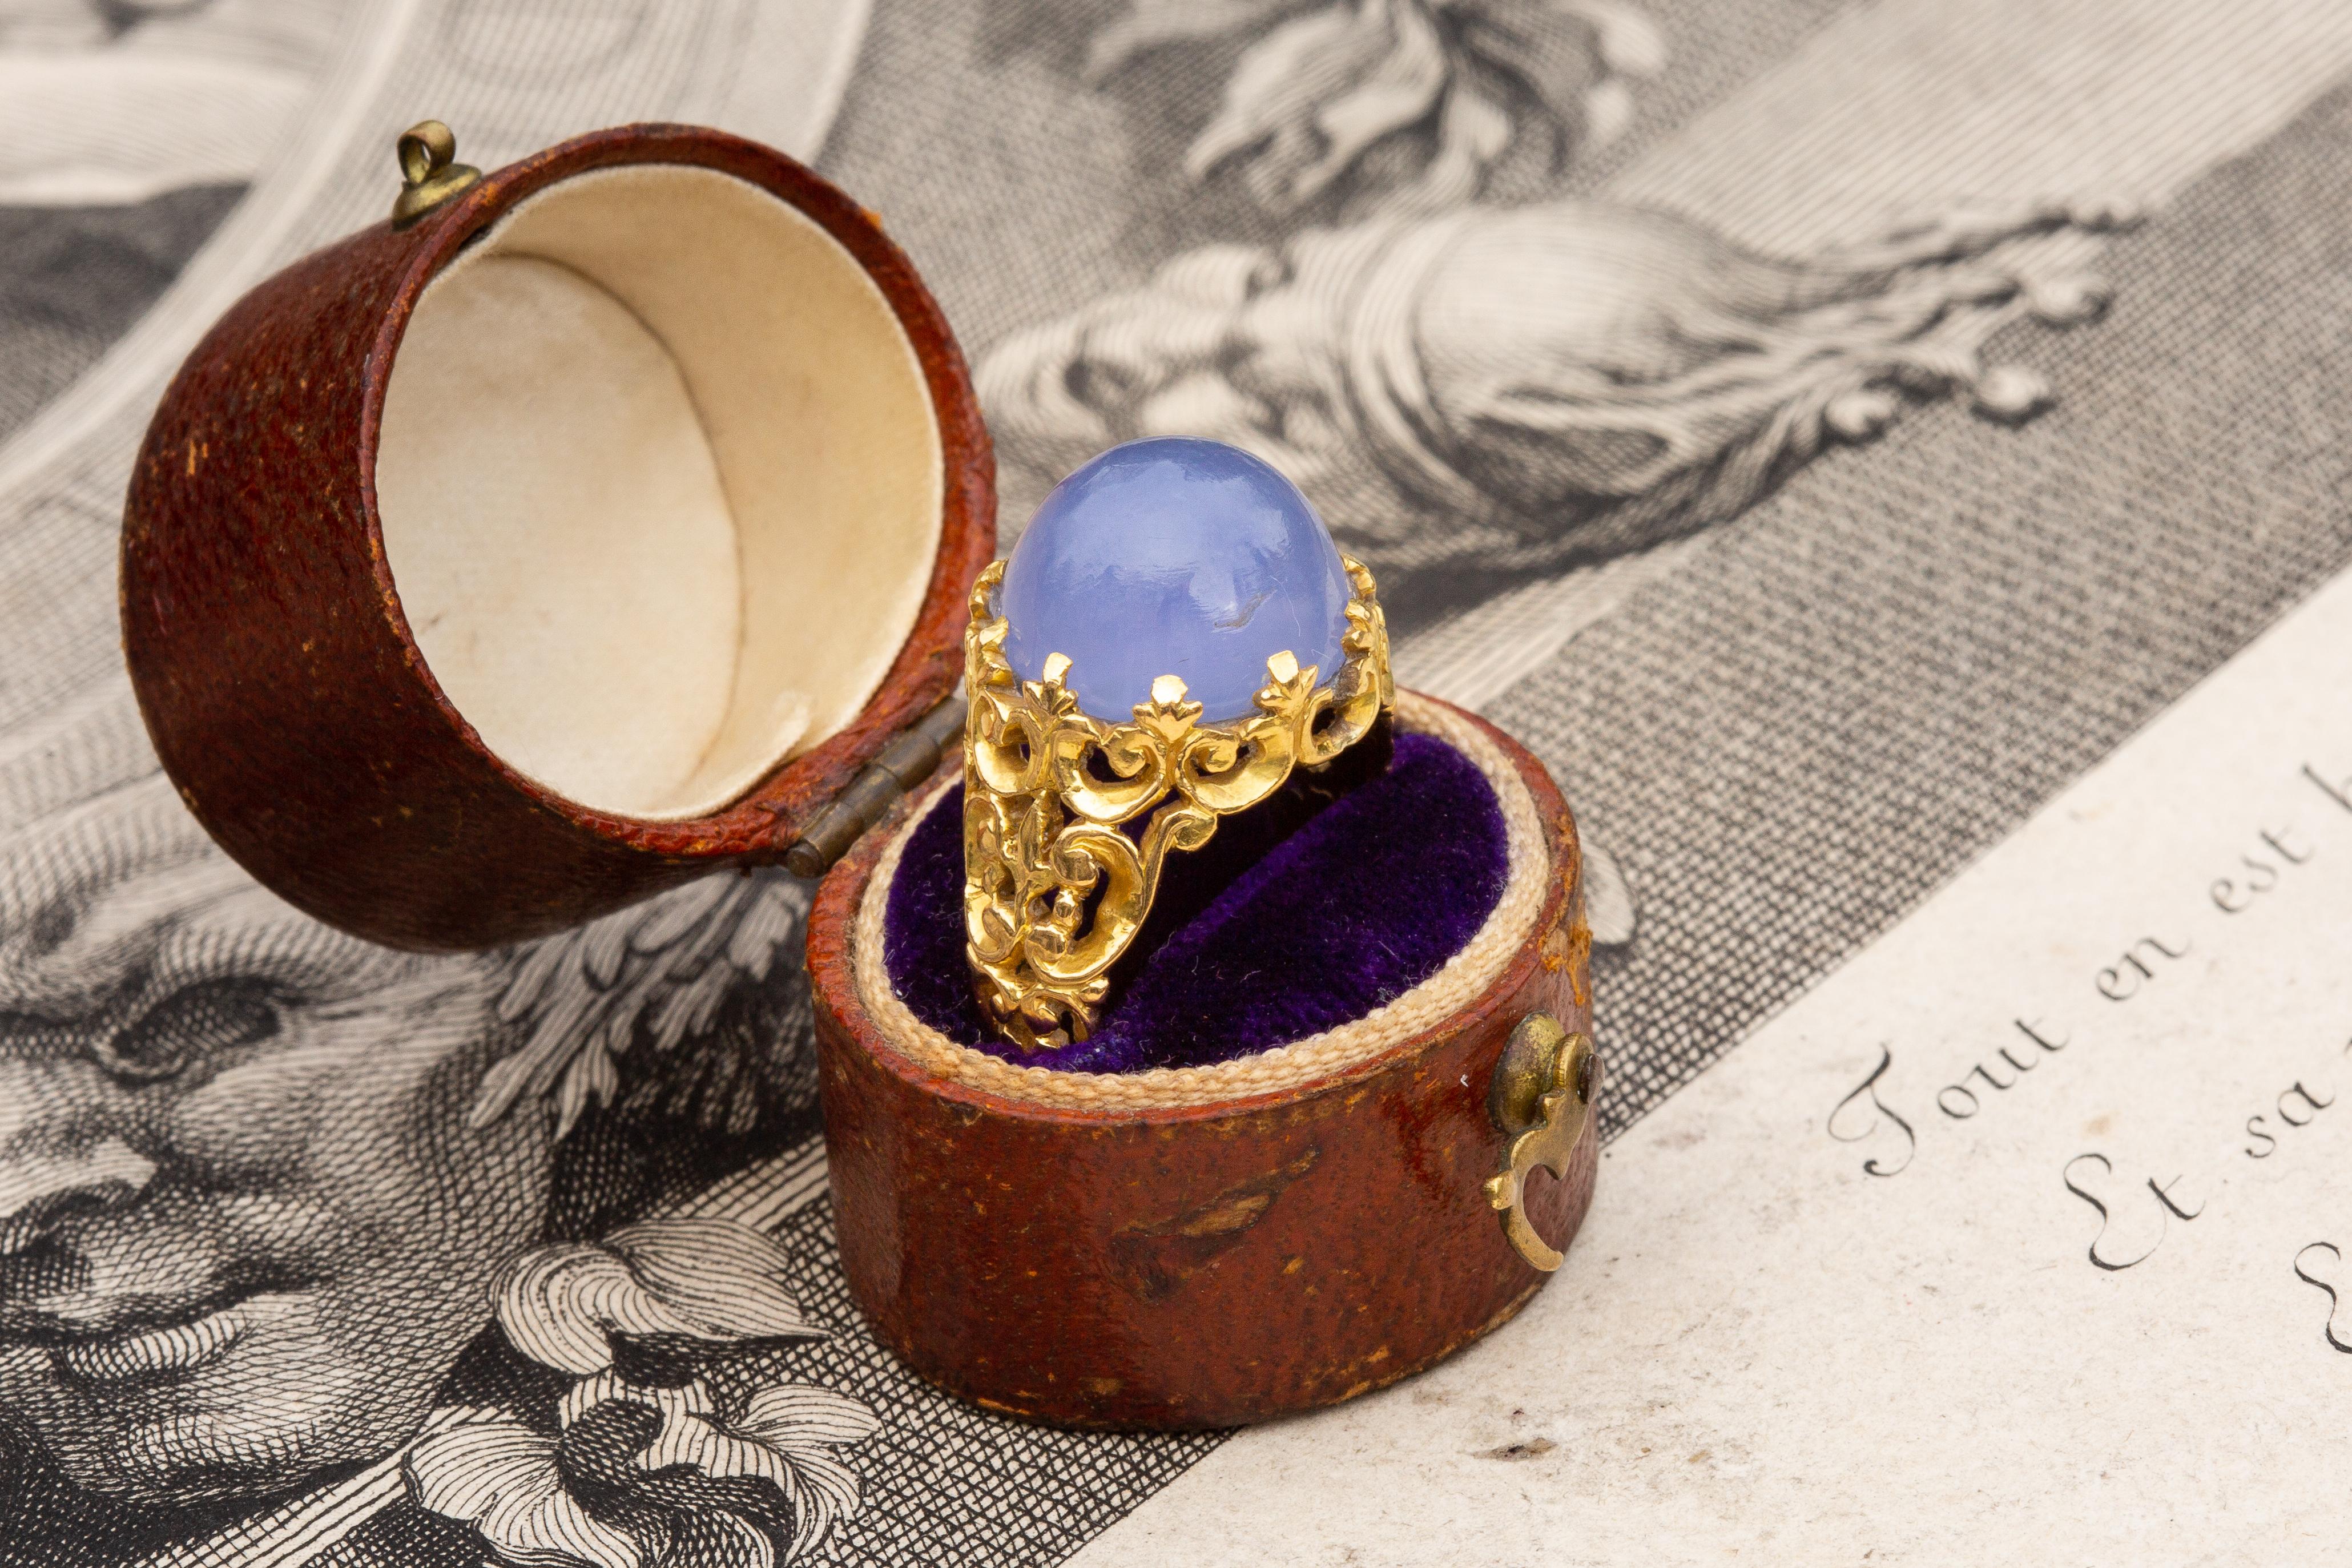 This stunning piece was made in France and dates to the mid-19th century. The ring is crafted in 18K gold and set with a large domed 9.5ct lilac blue chalcedony cabochon in a pronged setting. The blue agate stone rests in an incredibly intricate